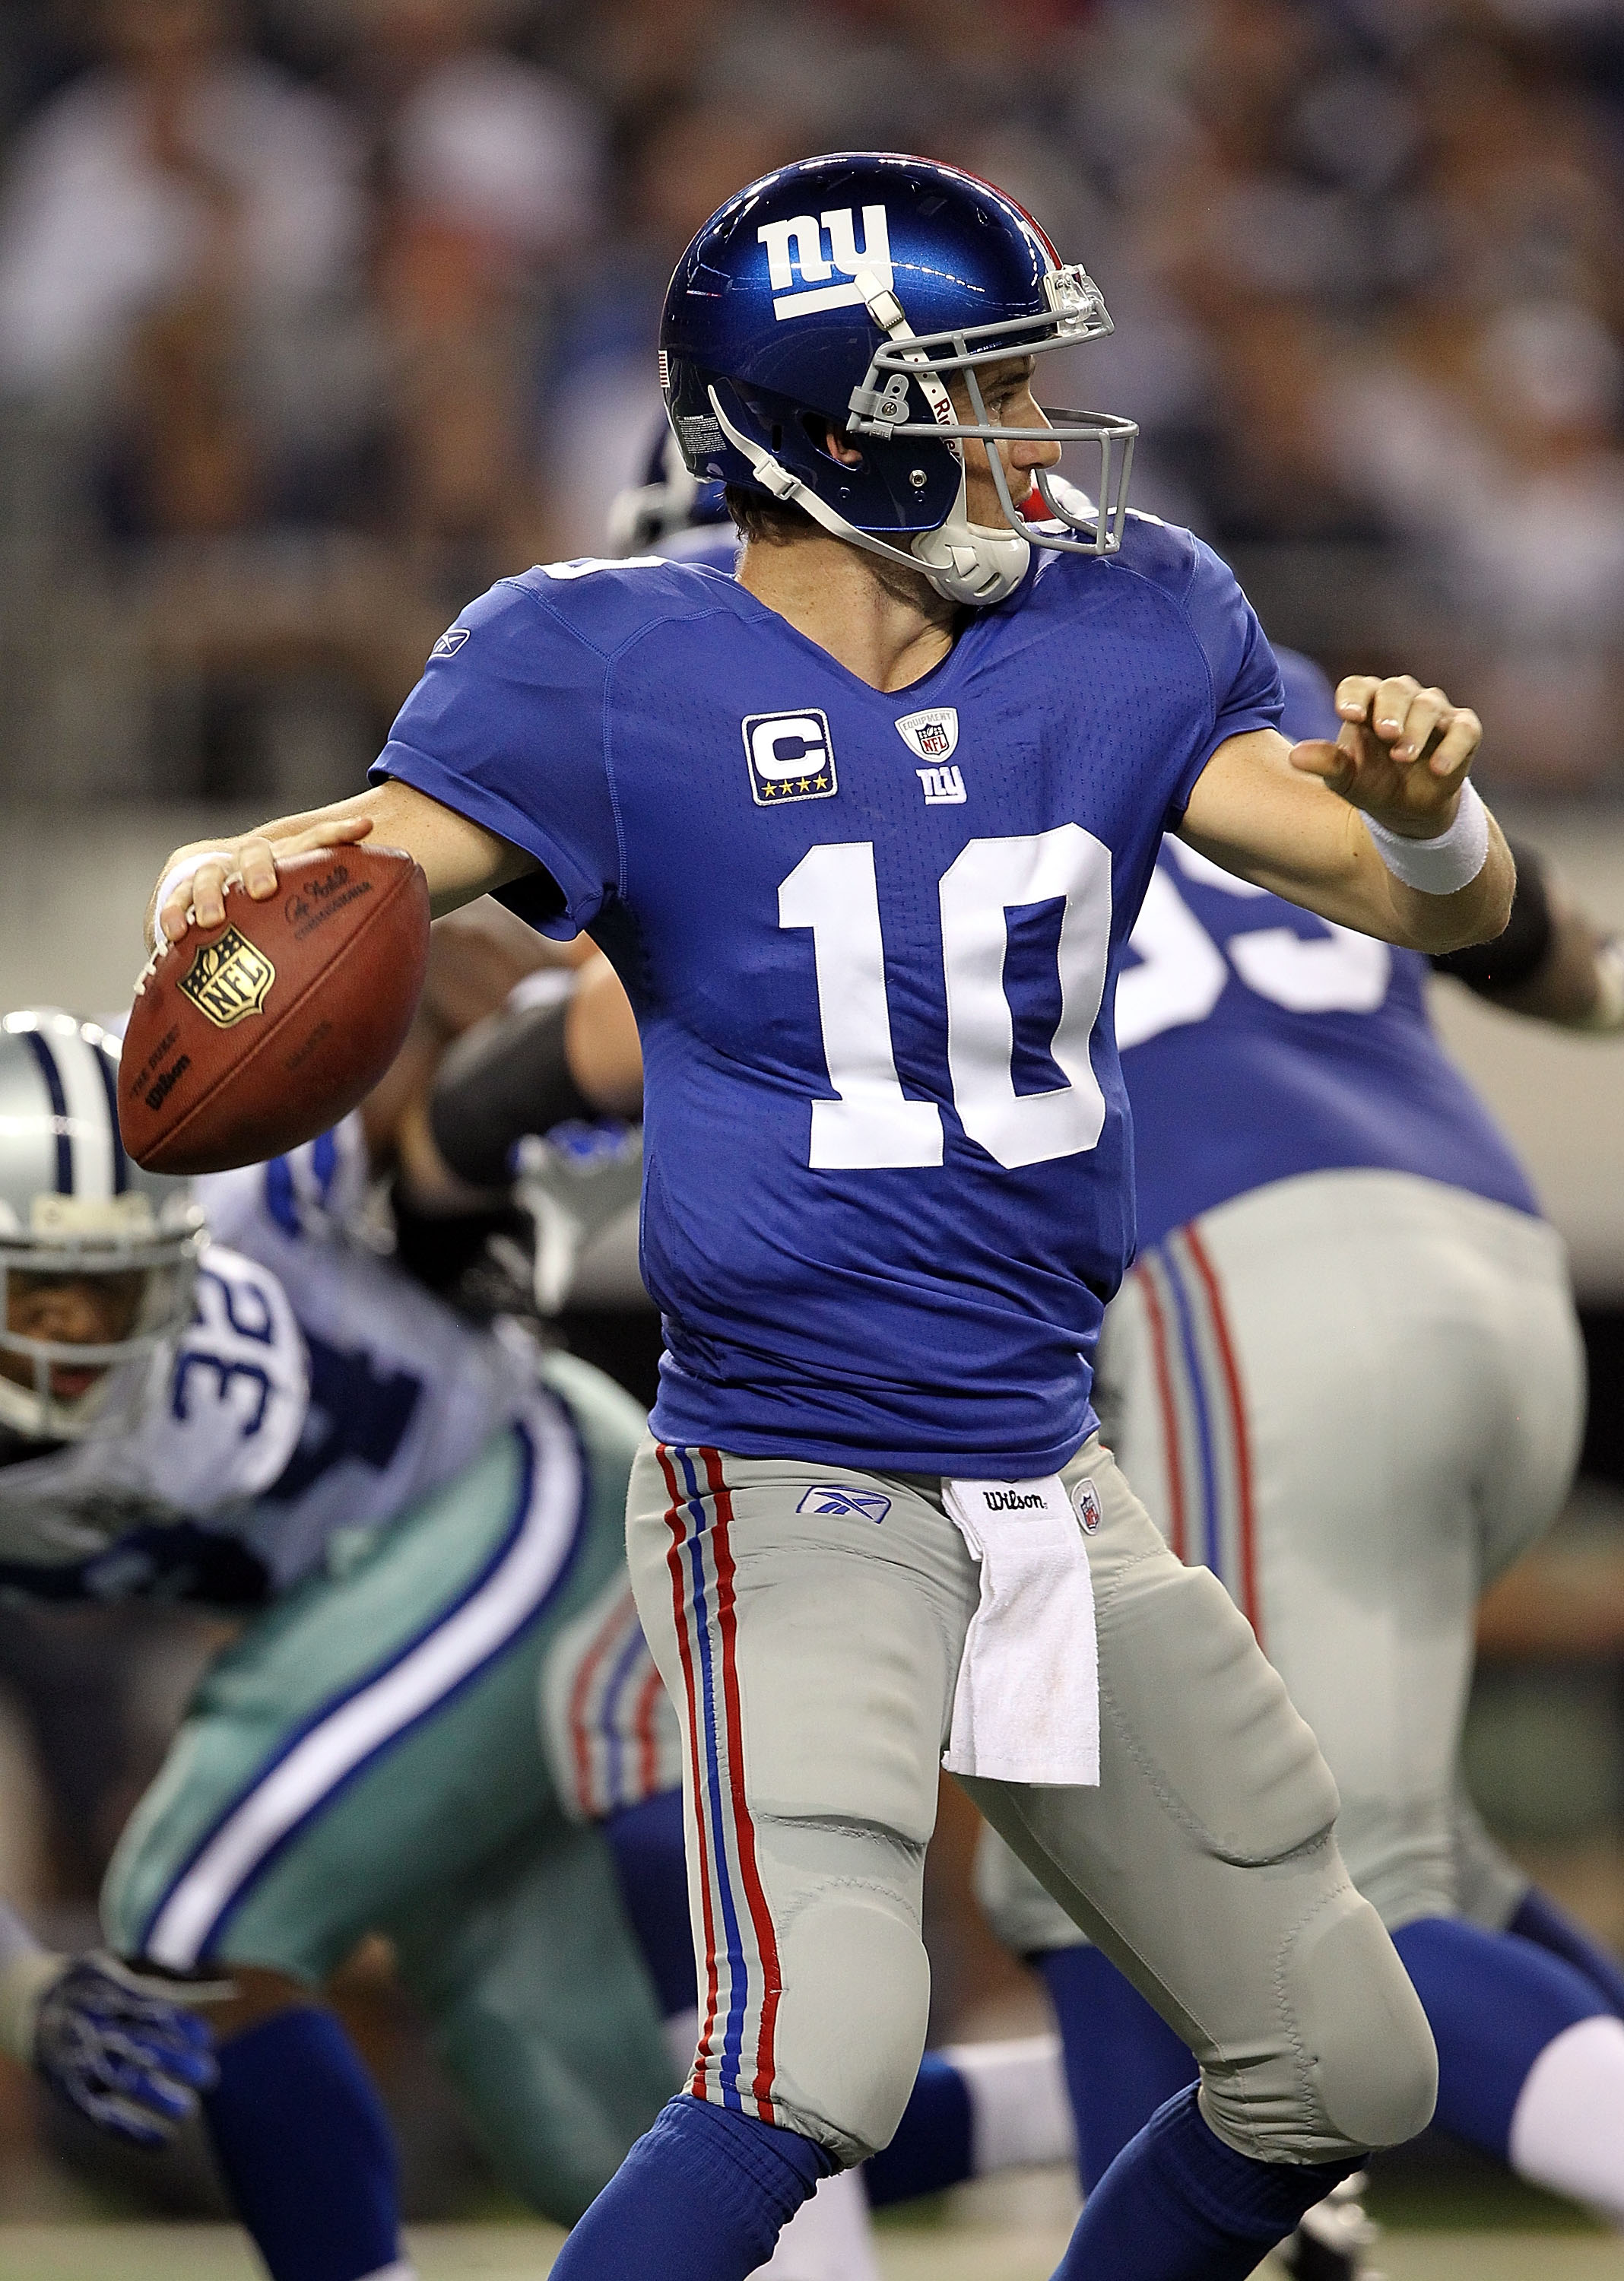 ARLINGTON, TX - OCTOBER 25:  Quarterback Eli Manning #10 of the New York Giants looks to pass against the Dallas Cowboys at Cowboys Stadium on October 25, 2010 in Arlington, Texas.  (Photo by Ronald Martinez/Getty Images)